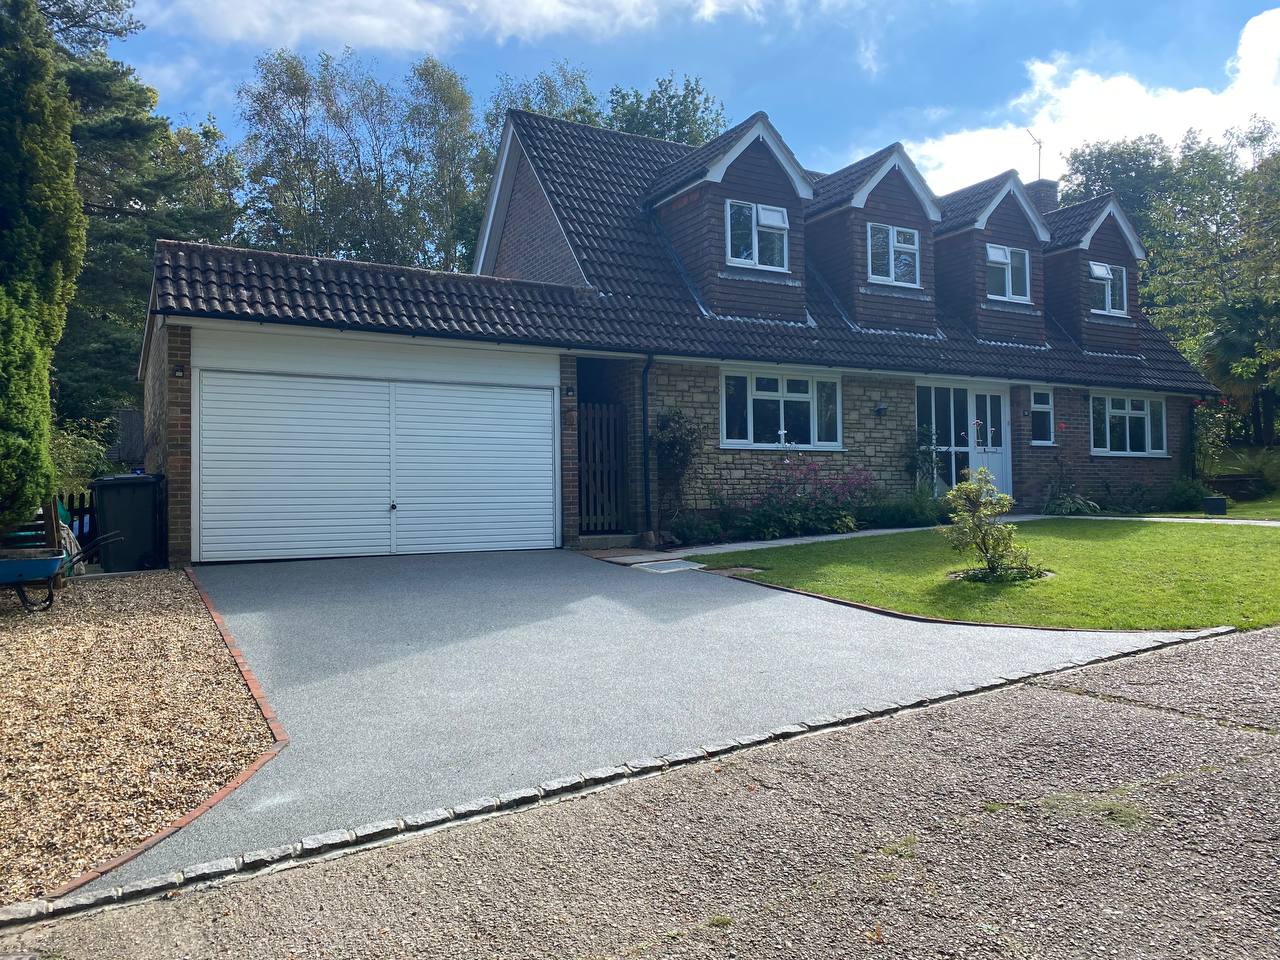 This is a photo of a Resin driveway carried out in Cheshire. All works done by Resin Driveways Cheshire